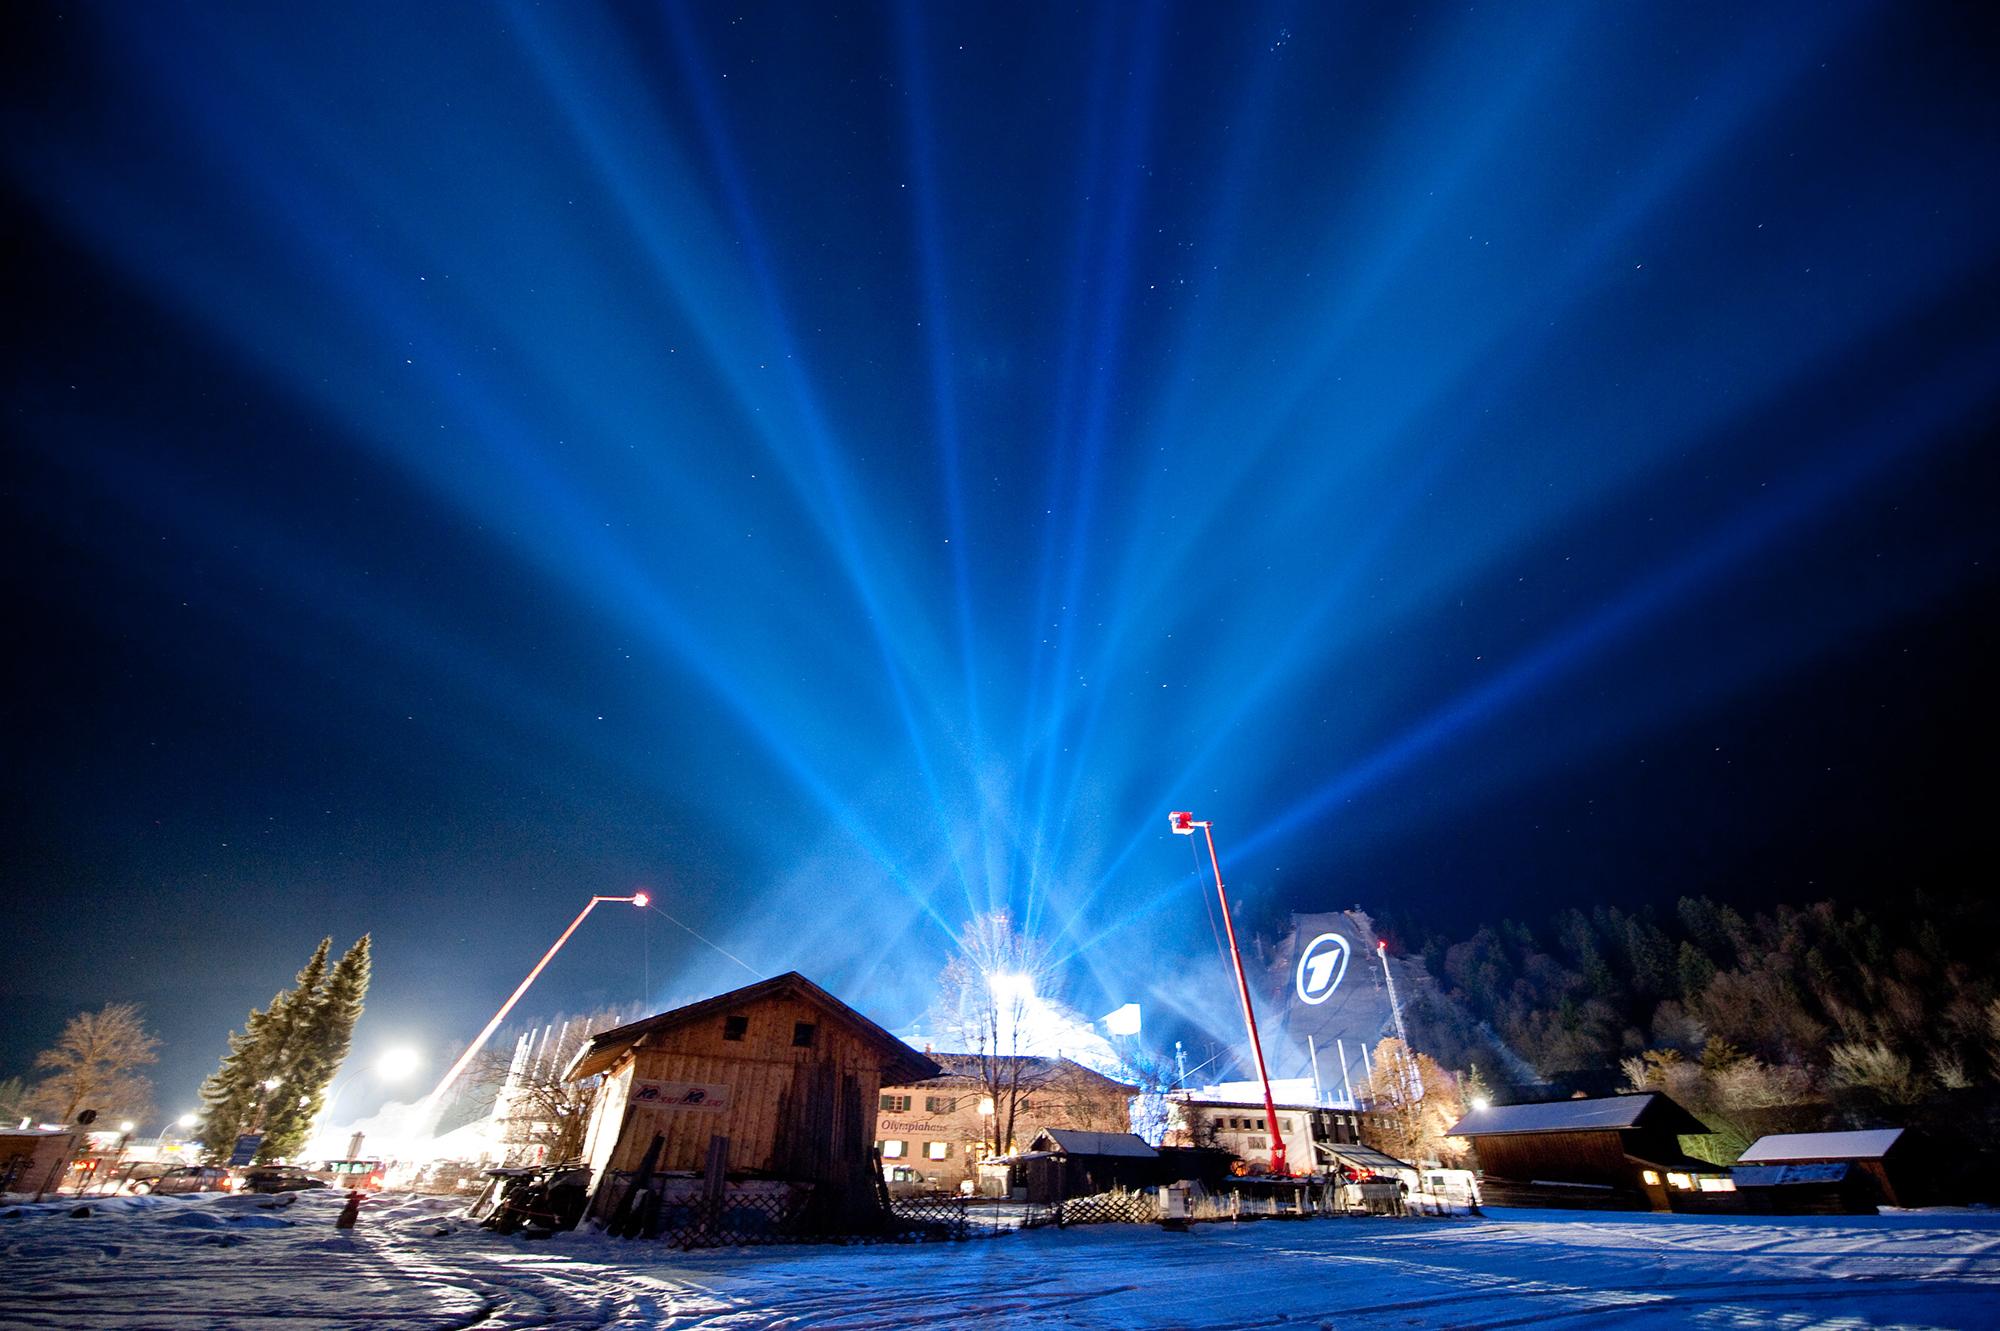 Skylights beam into the night sky. Snow is on the ground and we see a cluster of wooden buildings.